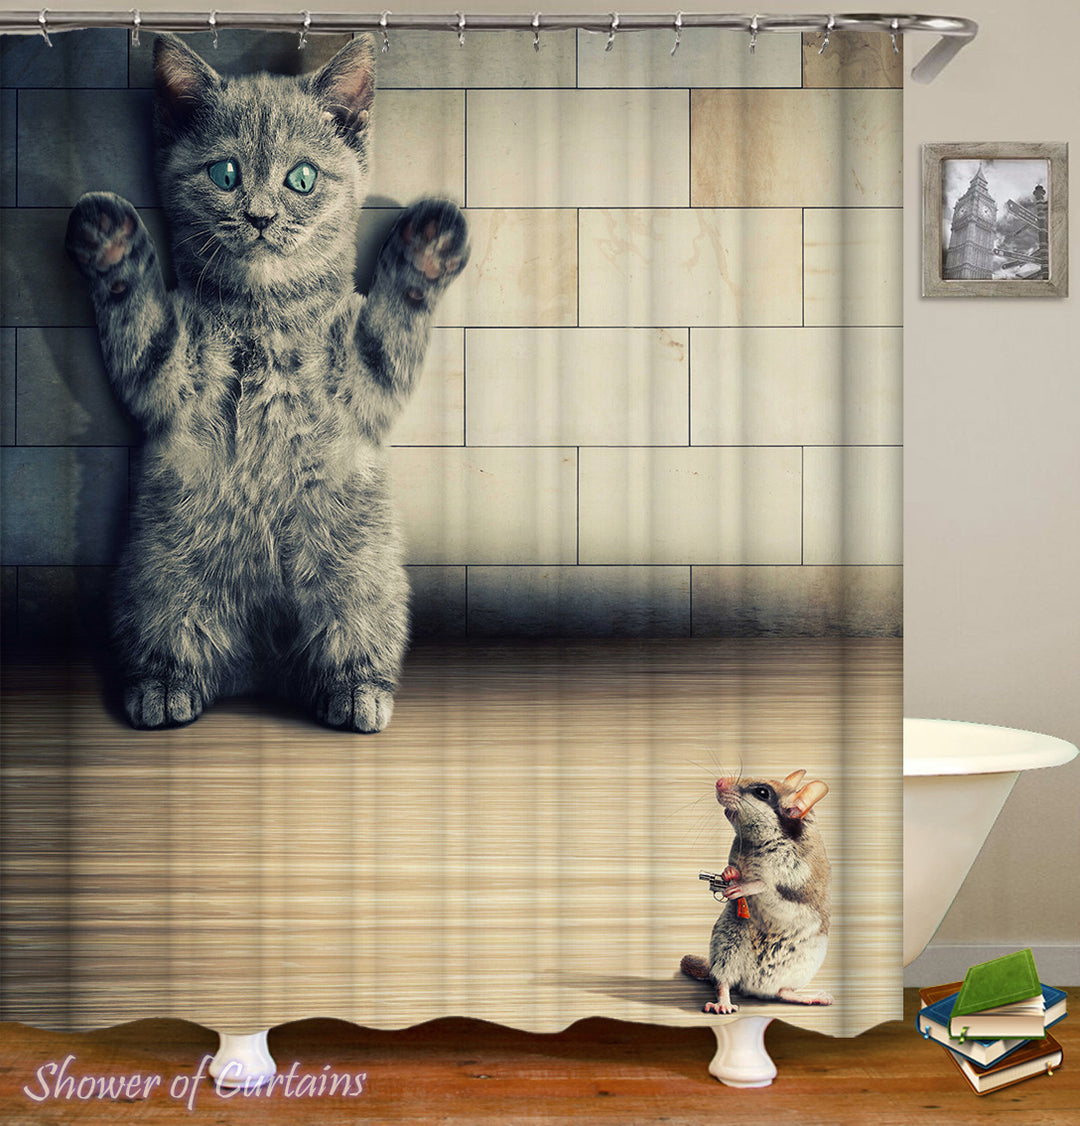 Funny cat shower curtain - Mouse VS. Cat 1-0 Mouse